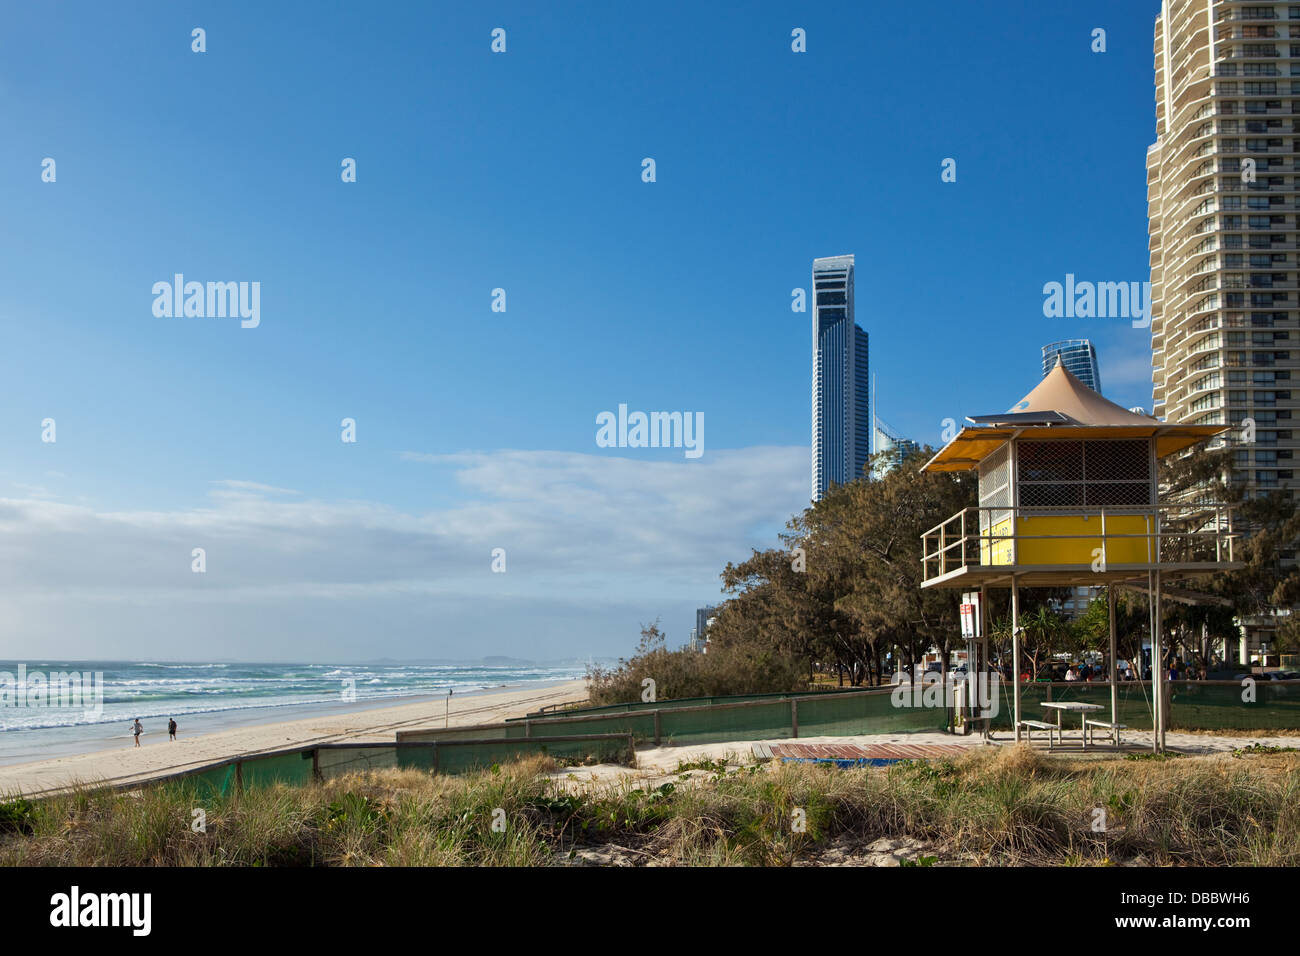 Lifeguard tower overlooking the beach at Surfers Paradise, Gold Coast, Queensland, Australia Stock Photo